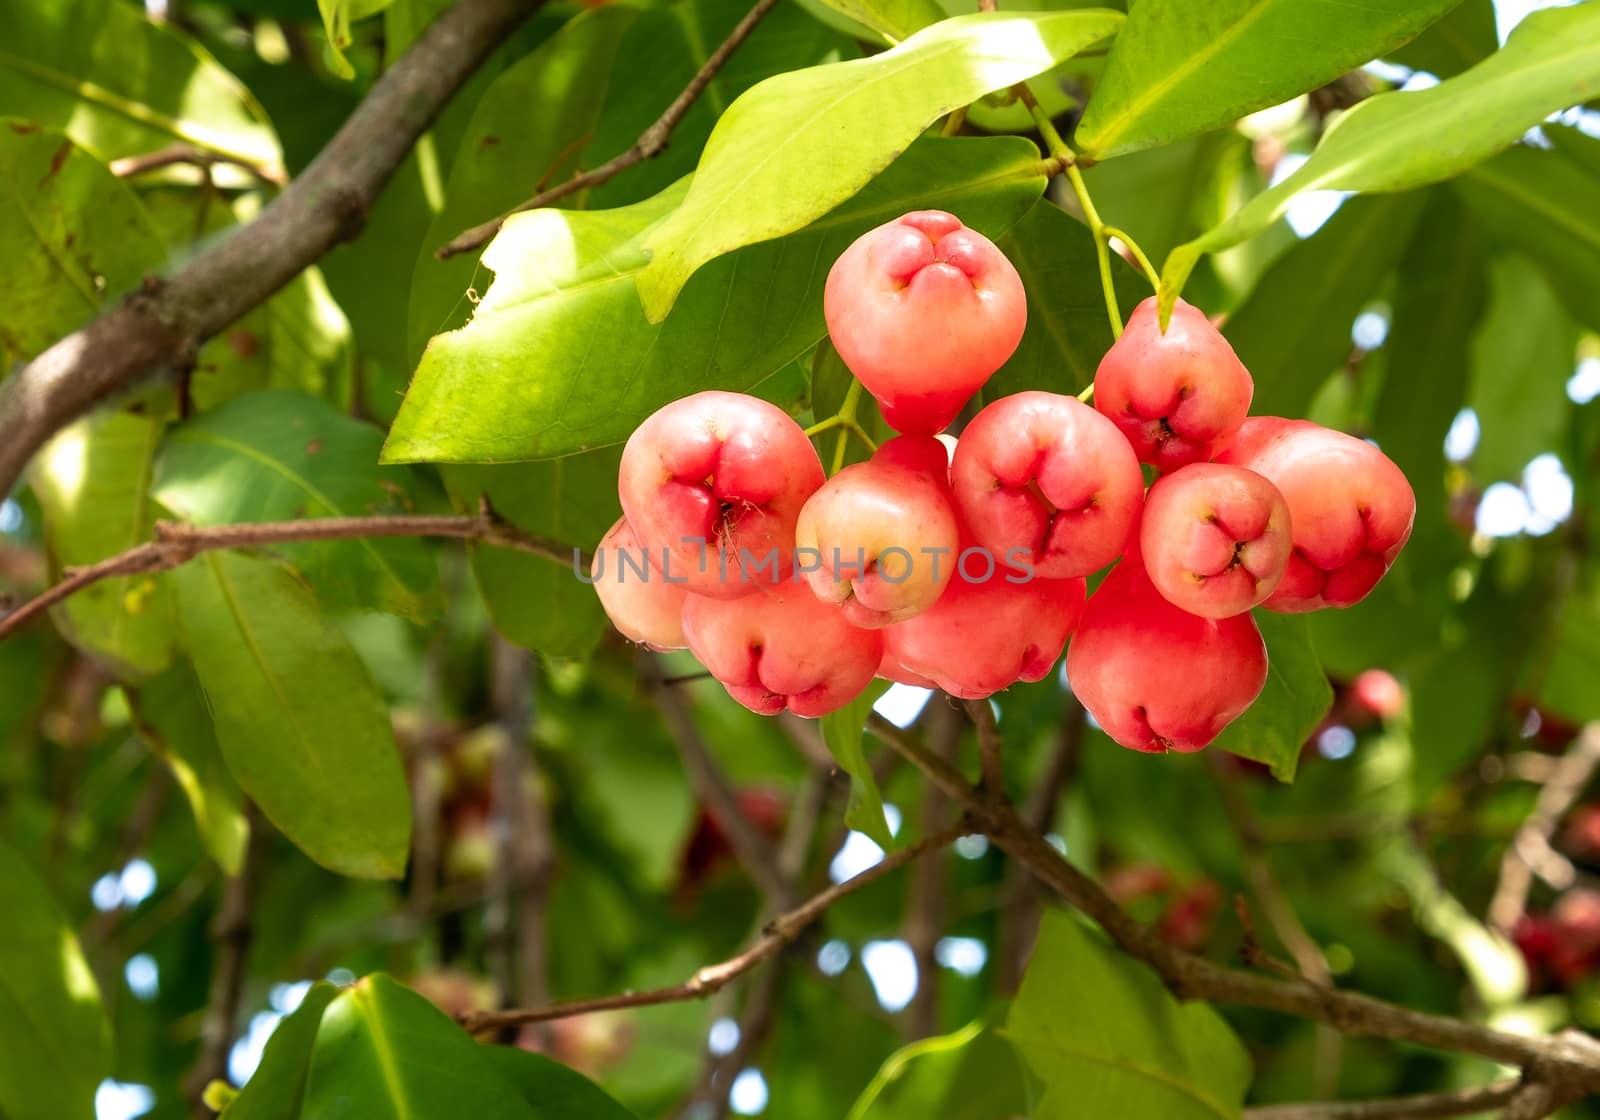  Watery rose apple tropical fruits on the branch of tree closeup.  Baby rose apple tree Bell fruit (Fresh Syzygium aqueum).